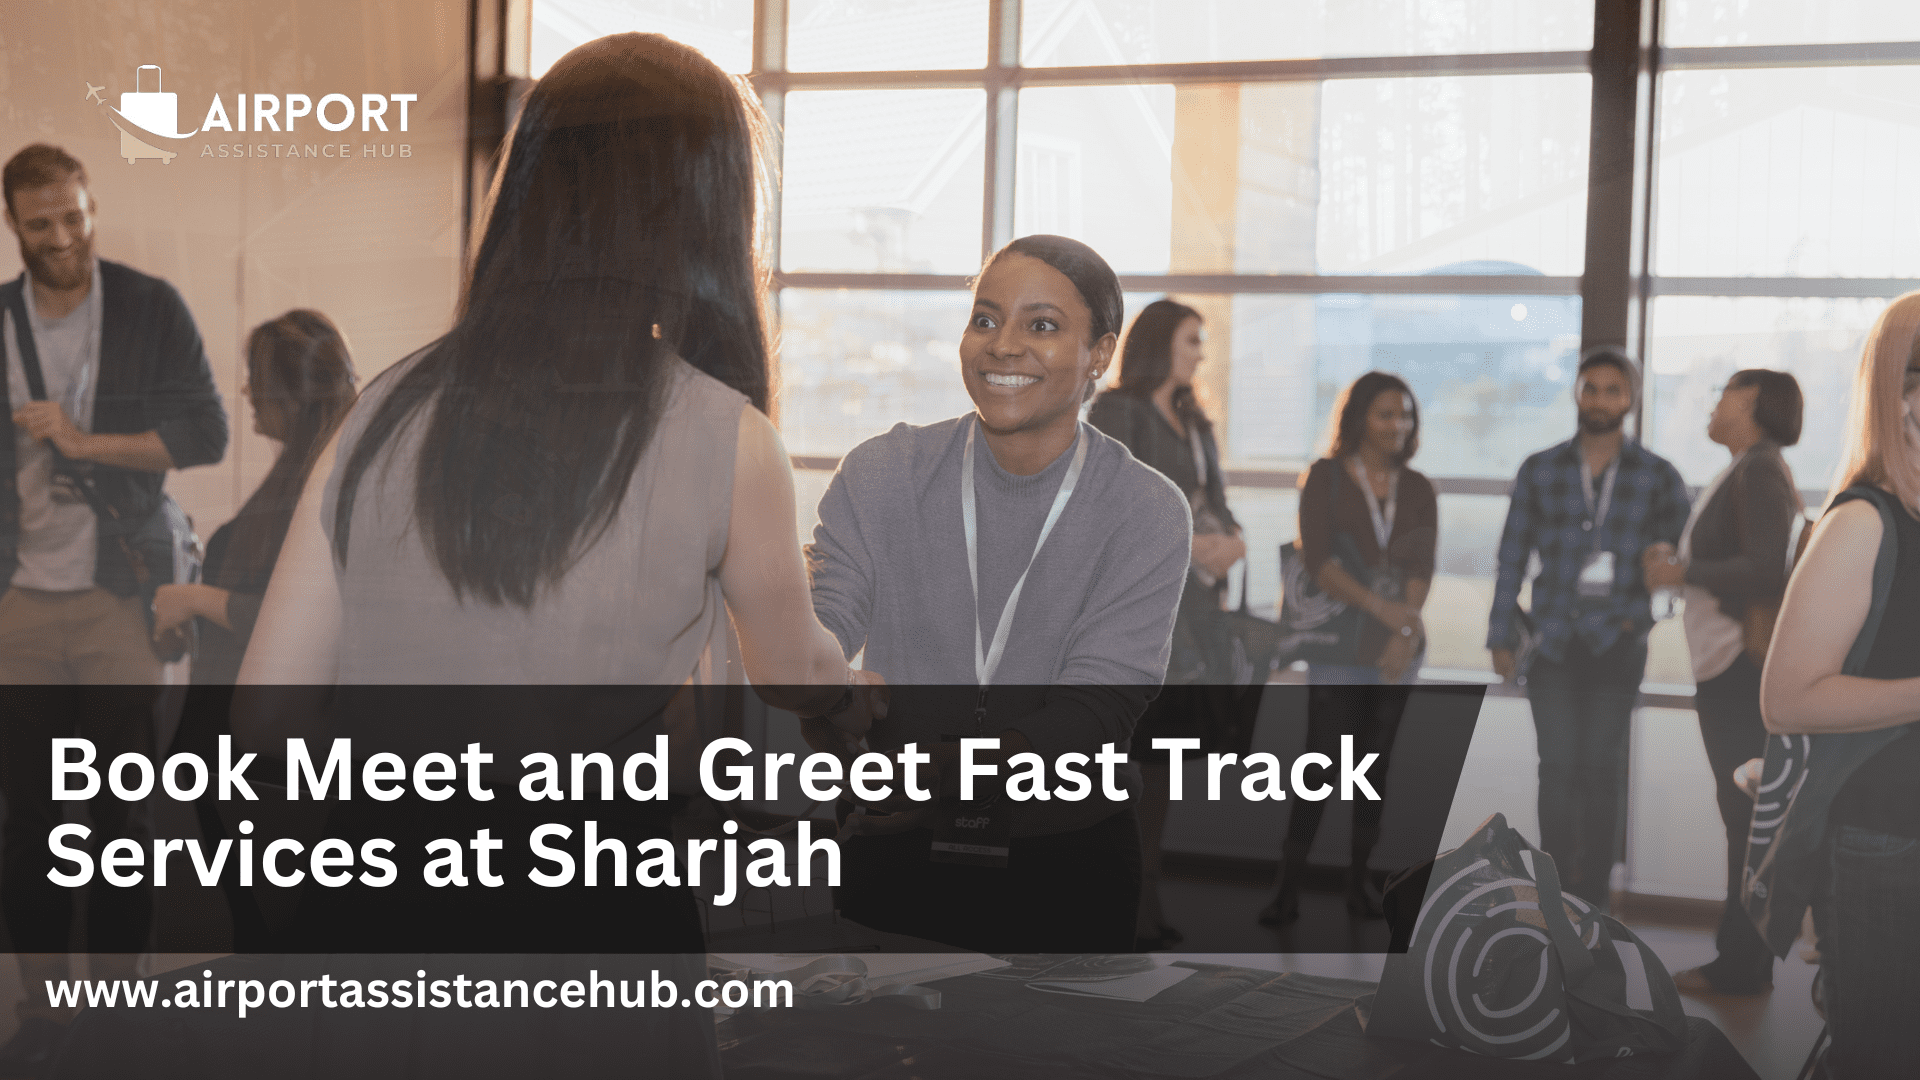 Sharjah Meet and Greet Services